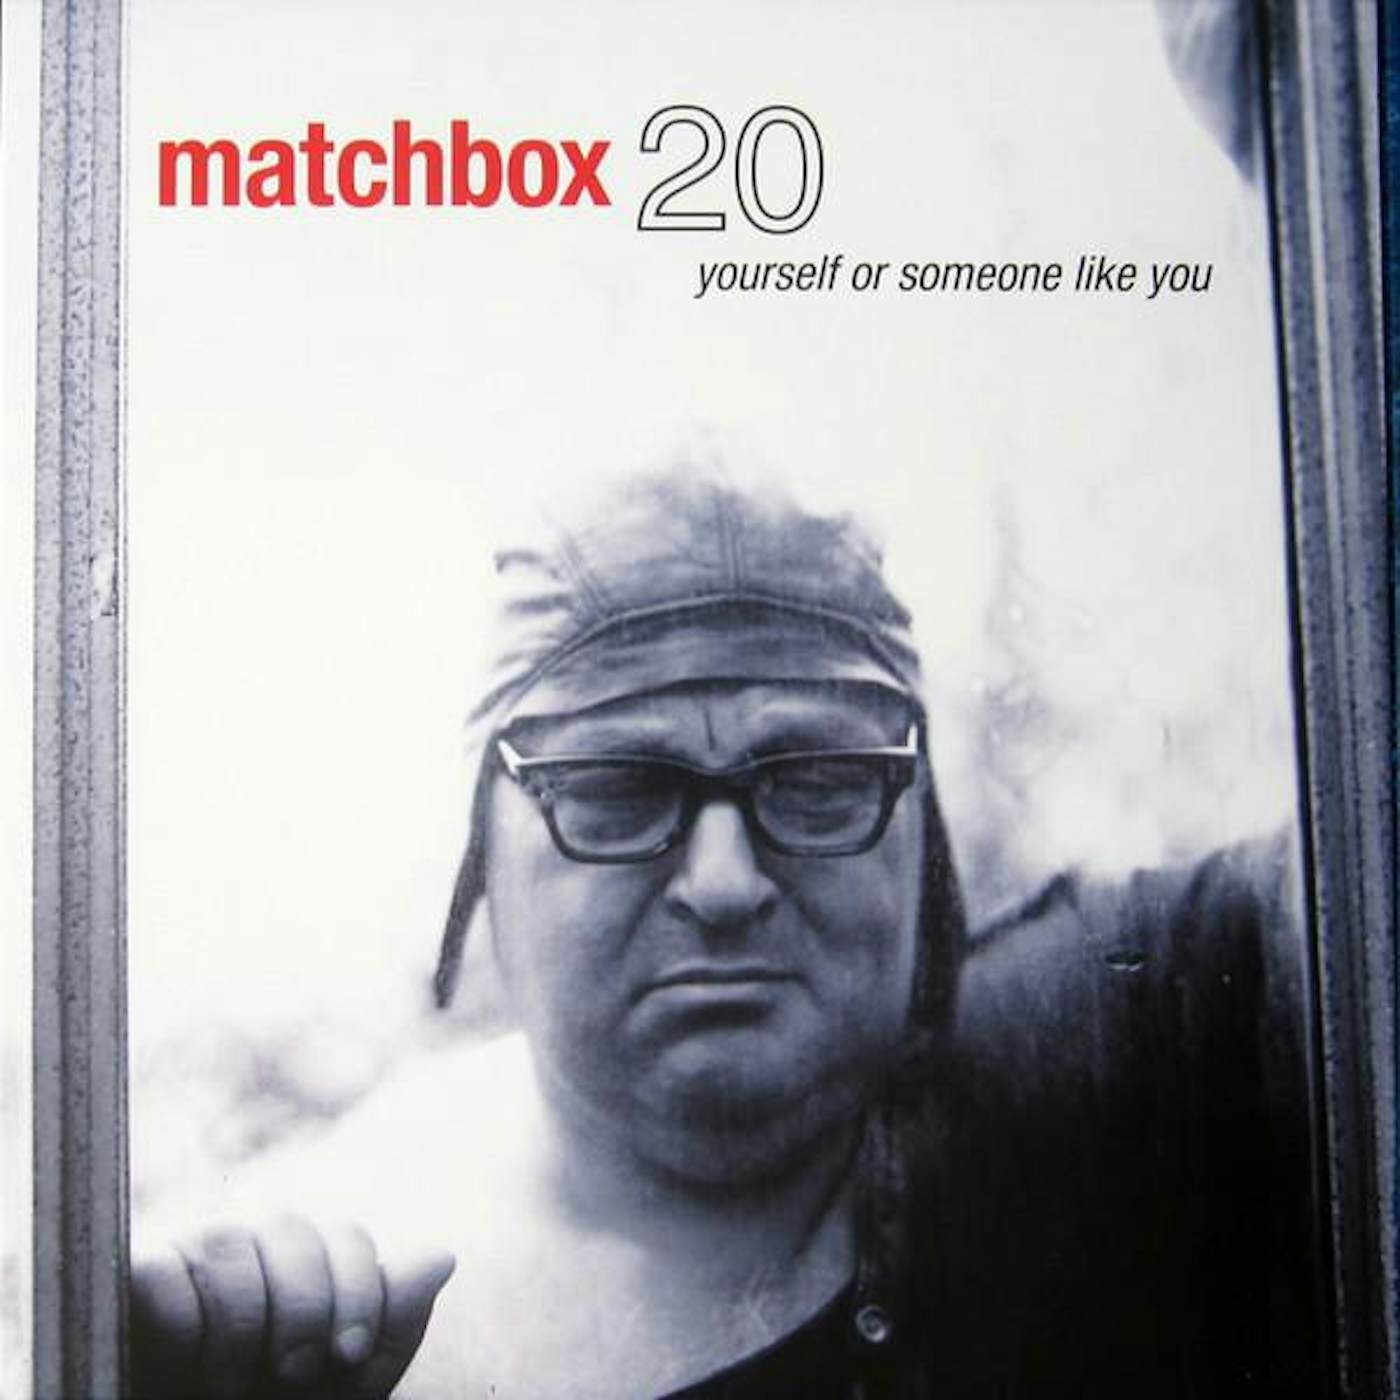 Matchbox 20 YOURSELF OR SOMEONE LIKE YOU (TRANSPARENT RED VINYL) Vinyl Record